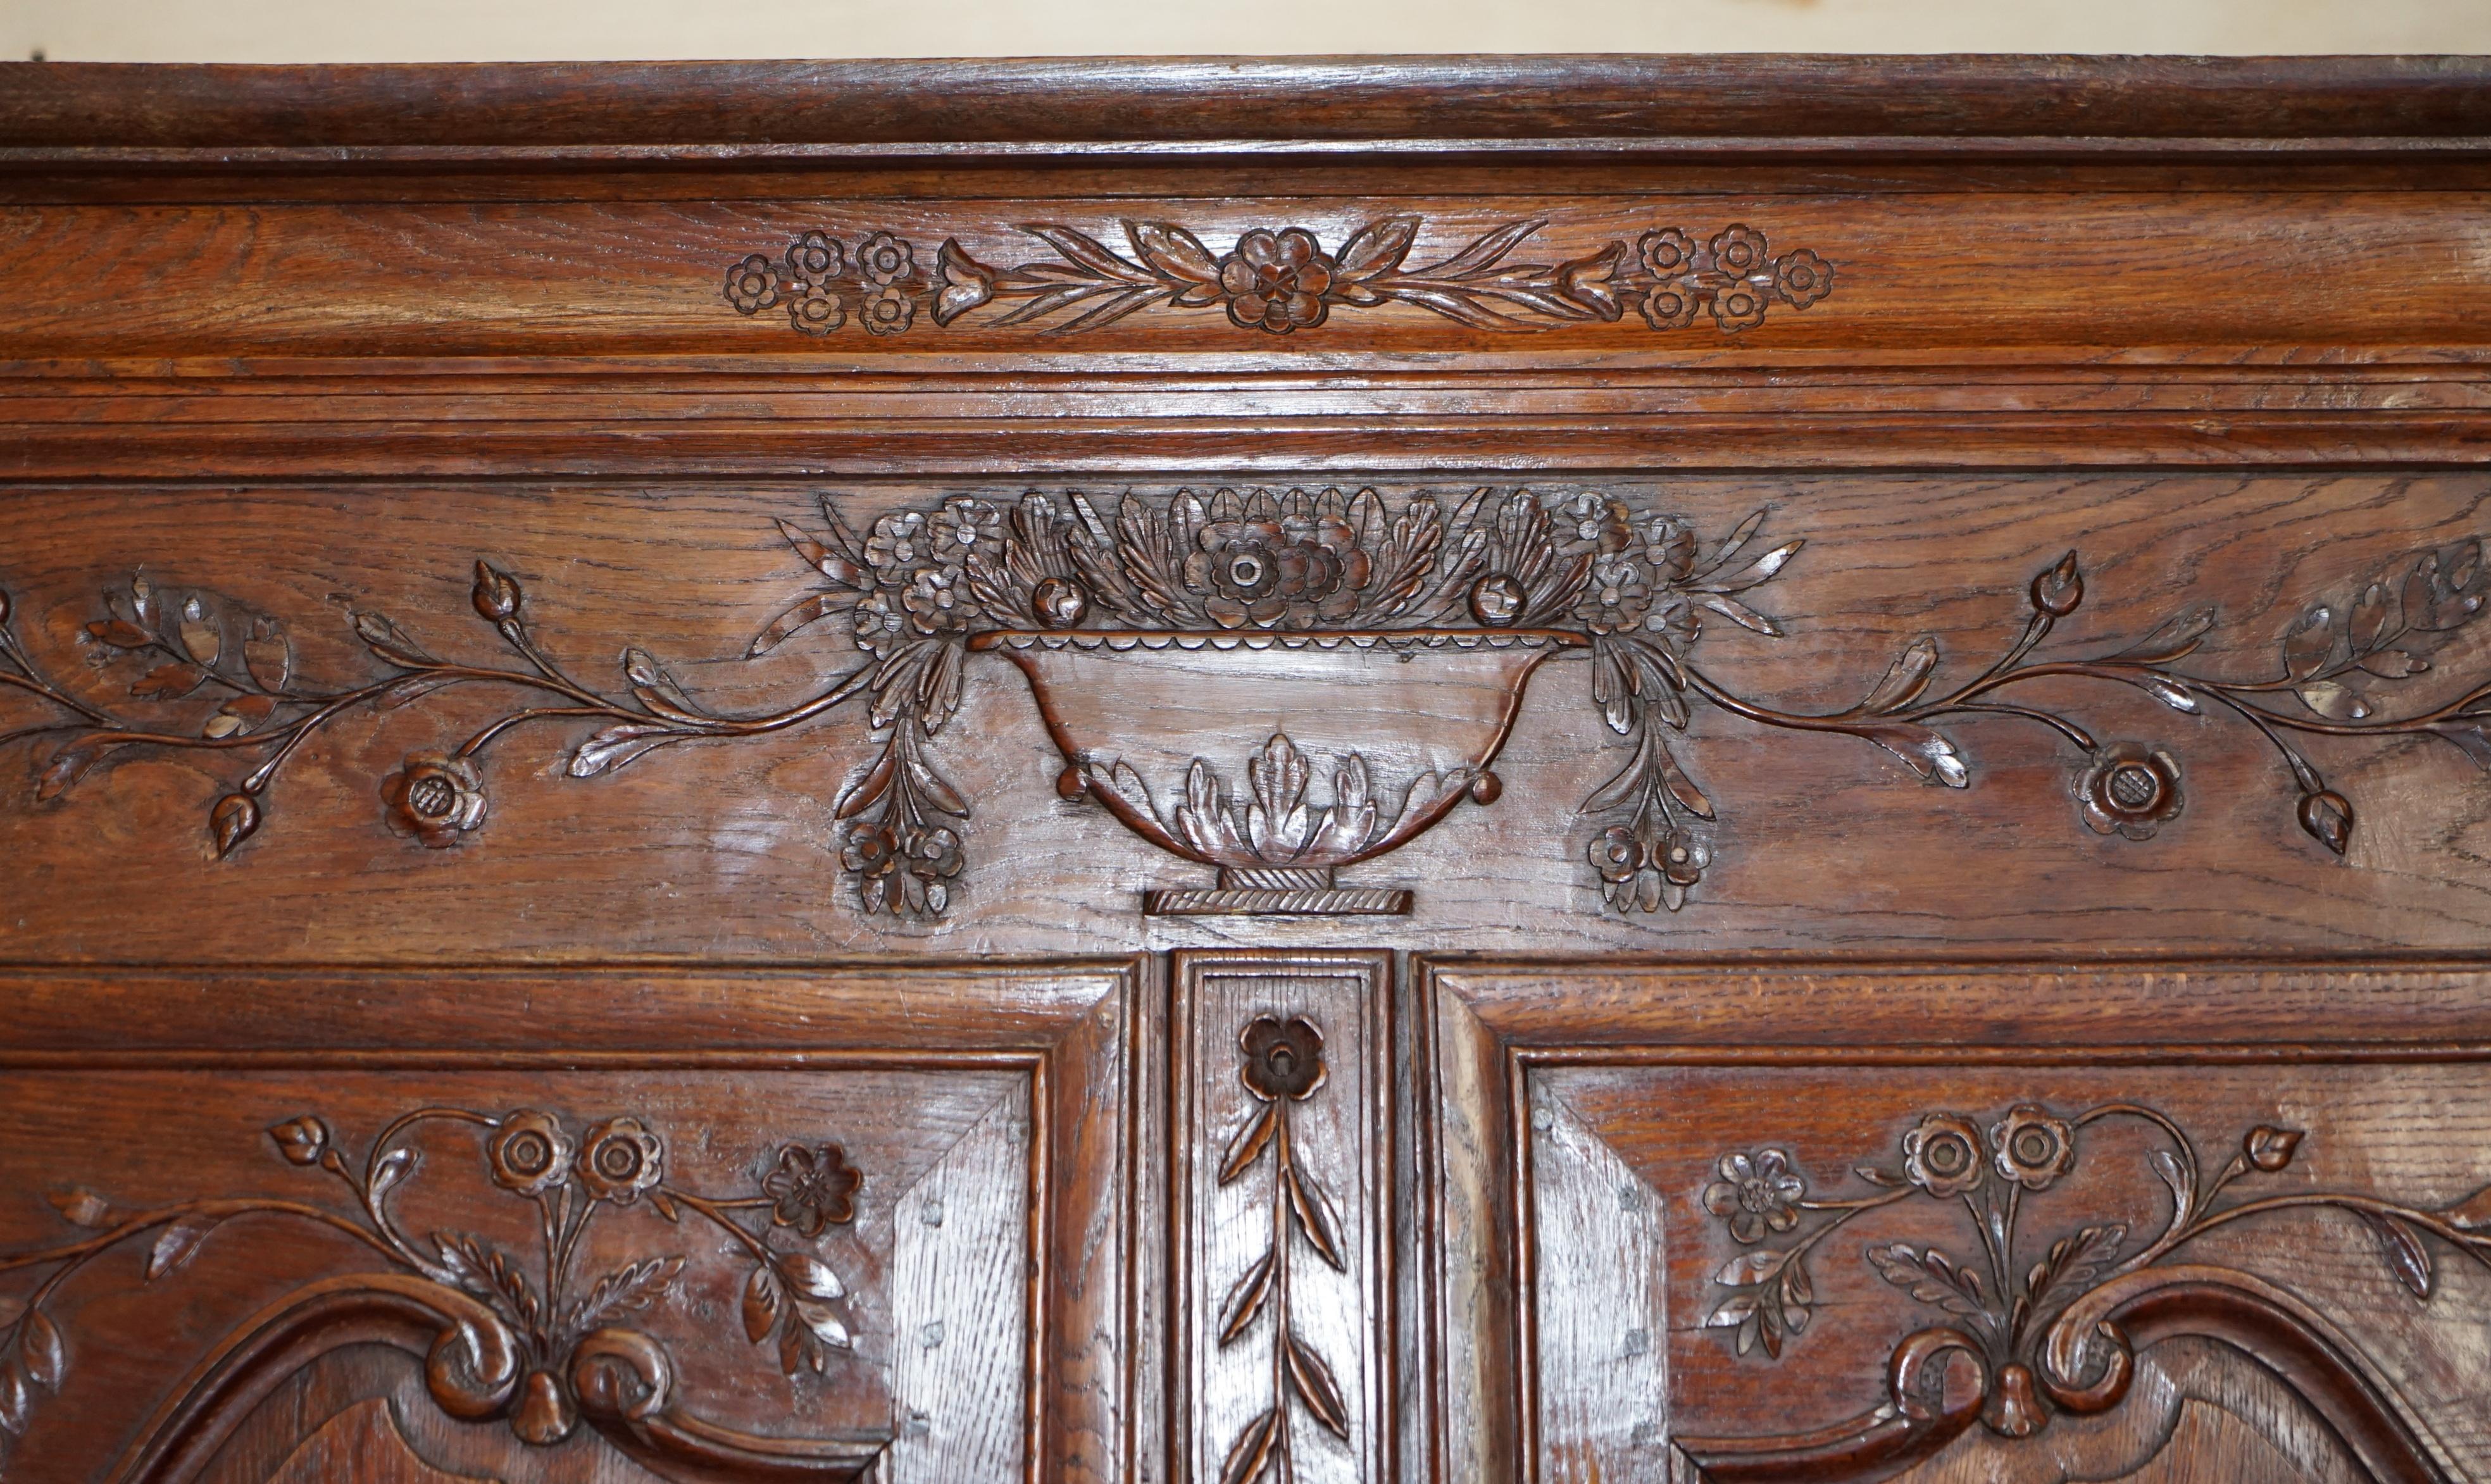 Hand-Crafted Antique 1844 Carved & Dated Large Wardrobe Armoire with Expertly Crafted Panels For Sale